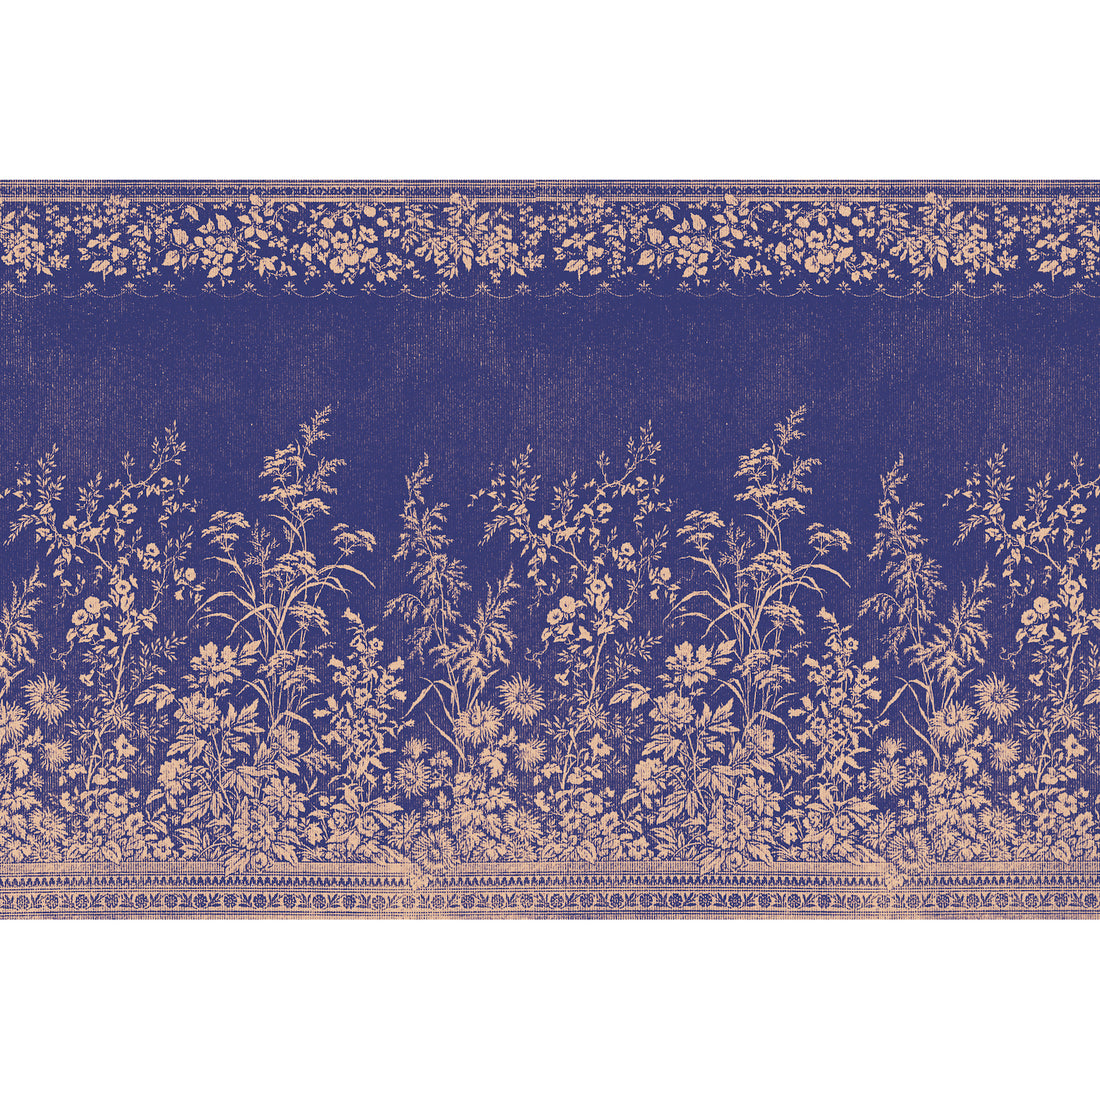 A fabric-inspired pattern featuring an ornamental border across the top and bottom, with a strip of blooms across the top and a tall row of dense wildflowers across the bottom, with a navy blue background printed on tan kraft paper.